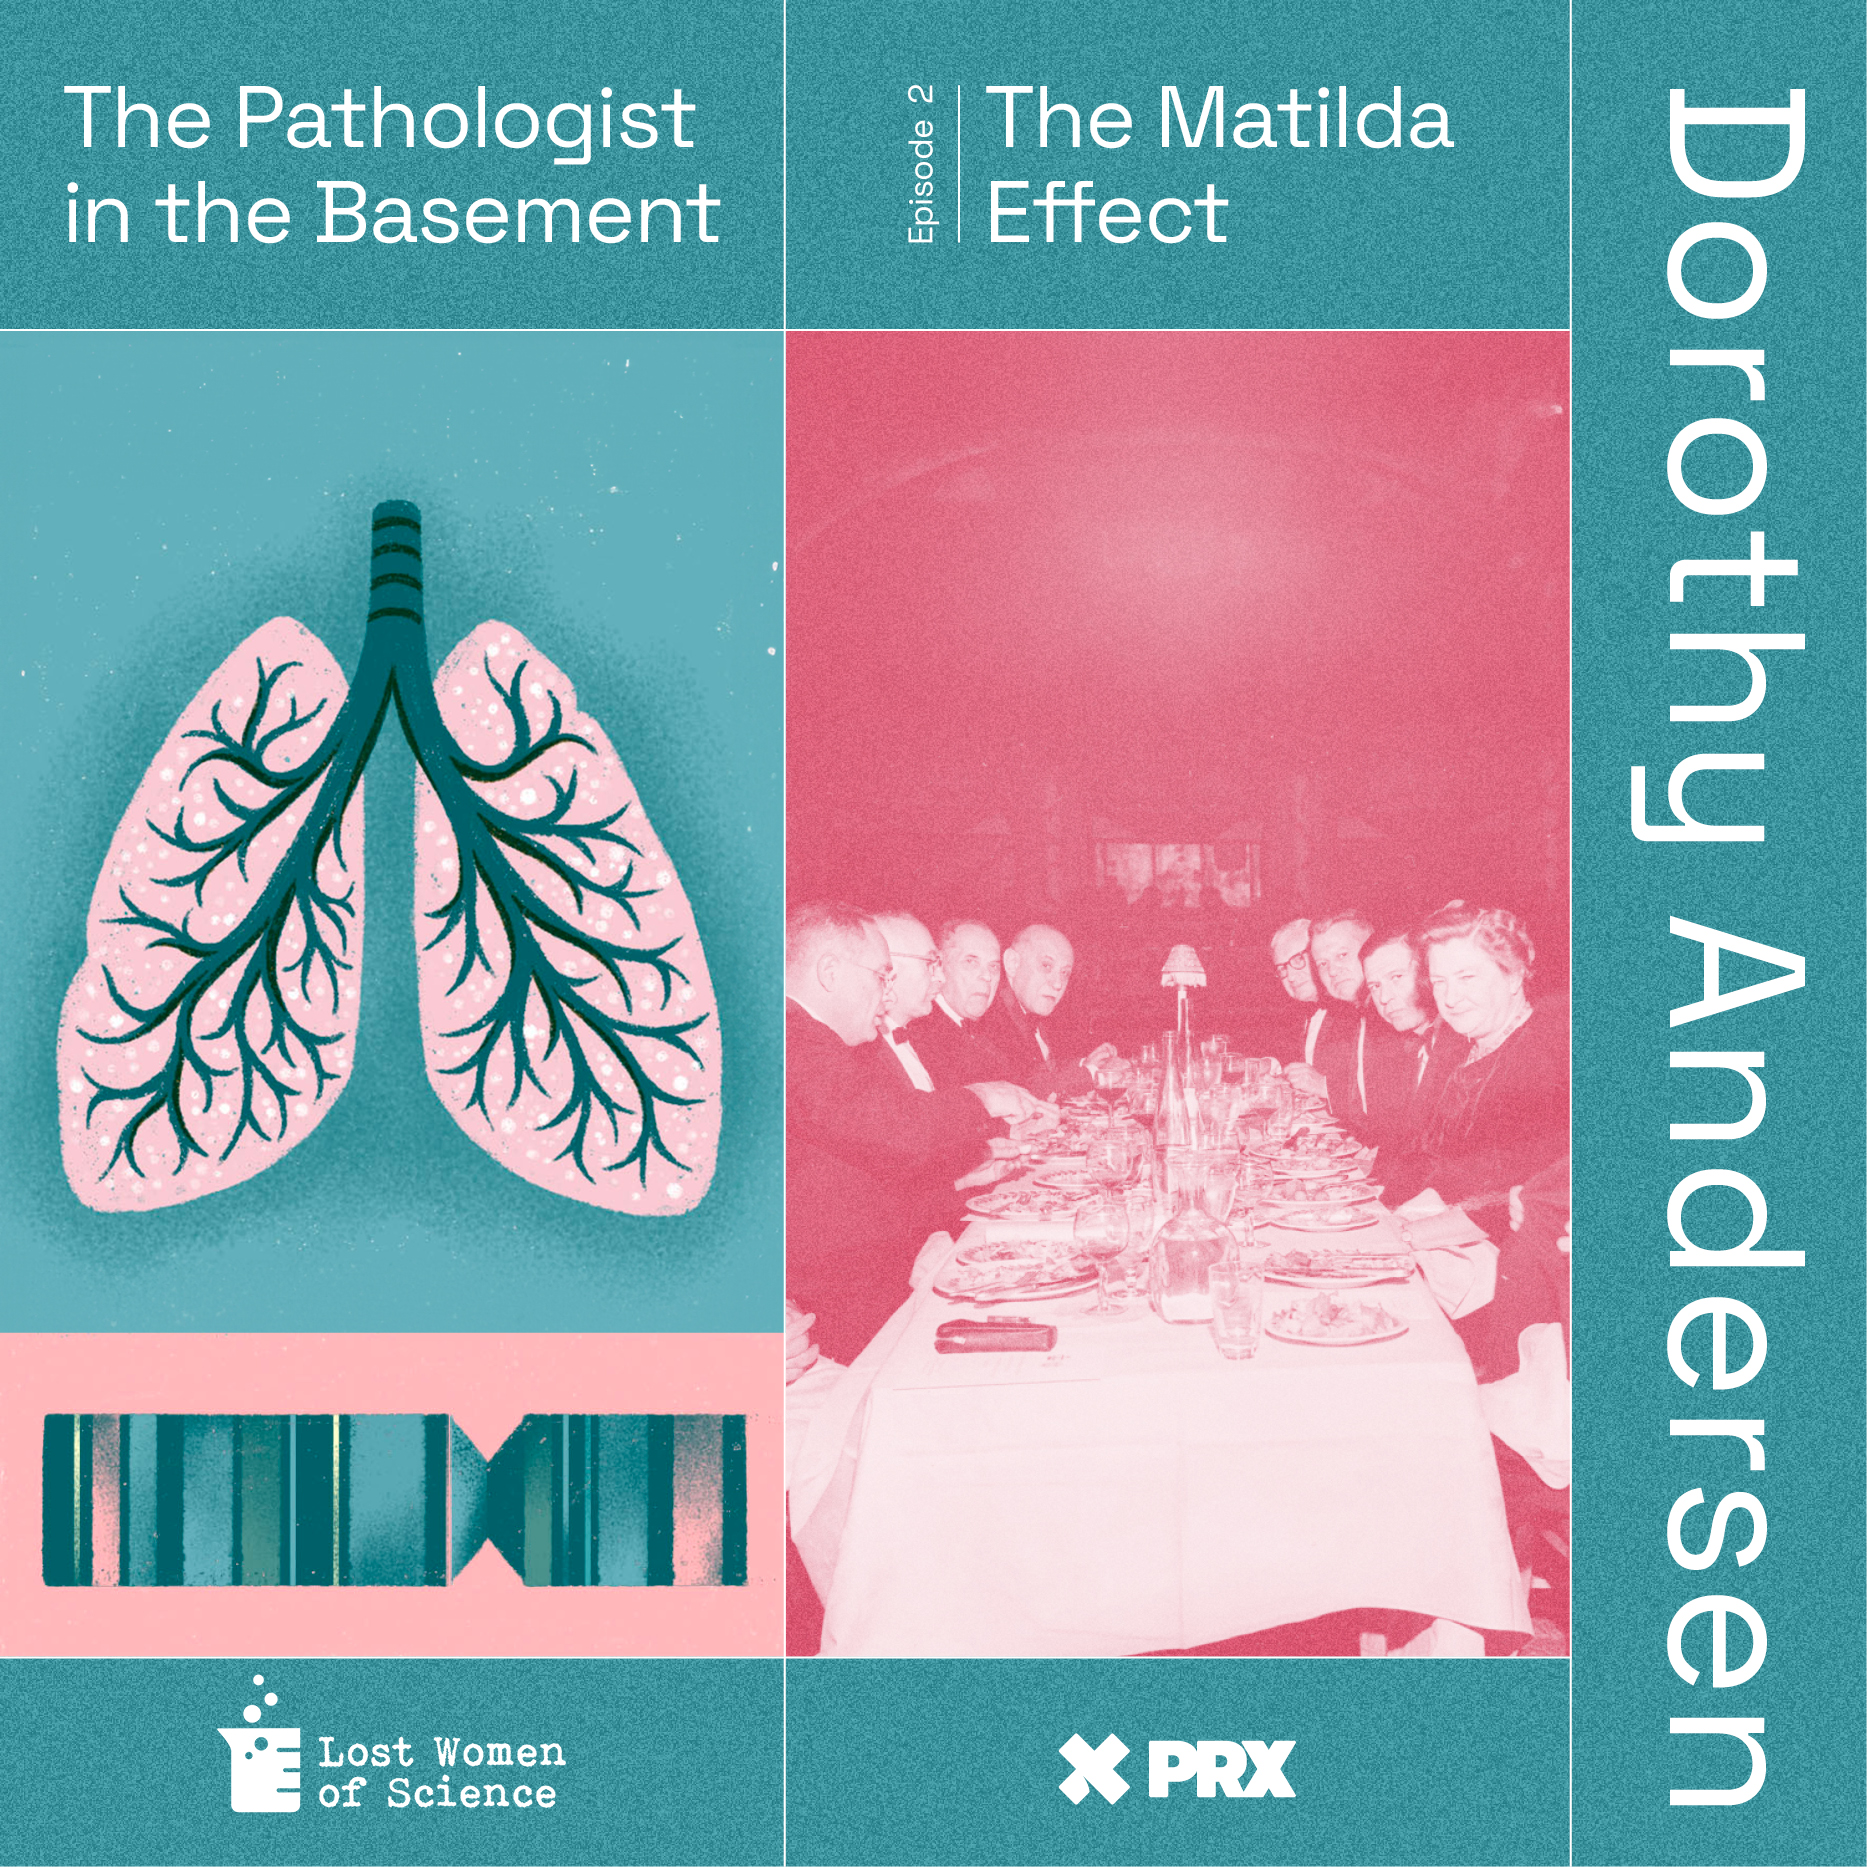 Thumbnail for "Revisiting the Pathologist in the Basement: Episode 2 The Matilda Effect".